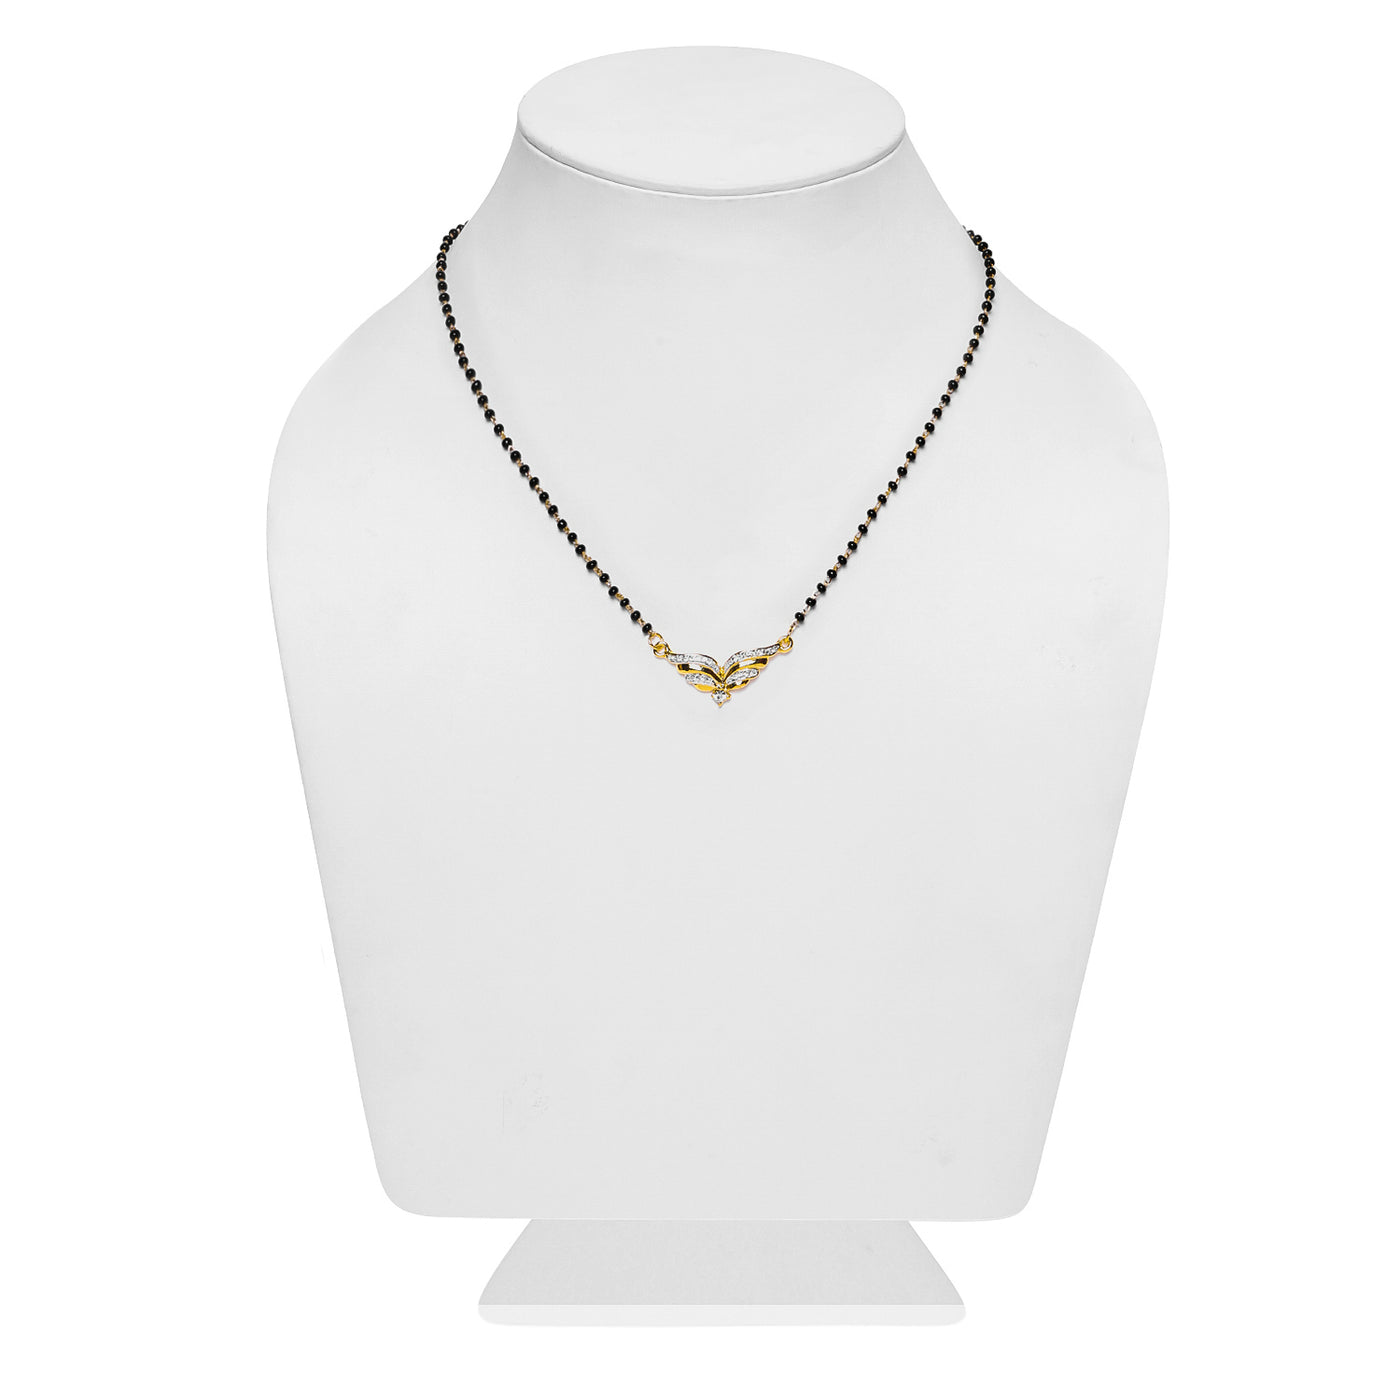 Estele Gold & Rhodium Plated Exquisite Mangalsutra Necklace with Austrian Crystals for Women